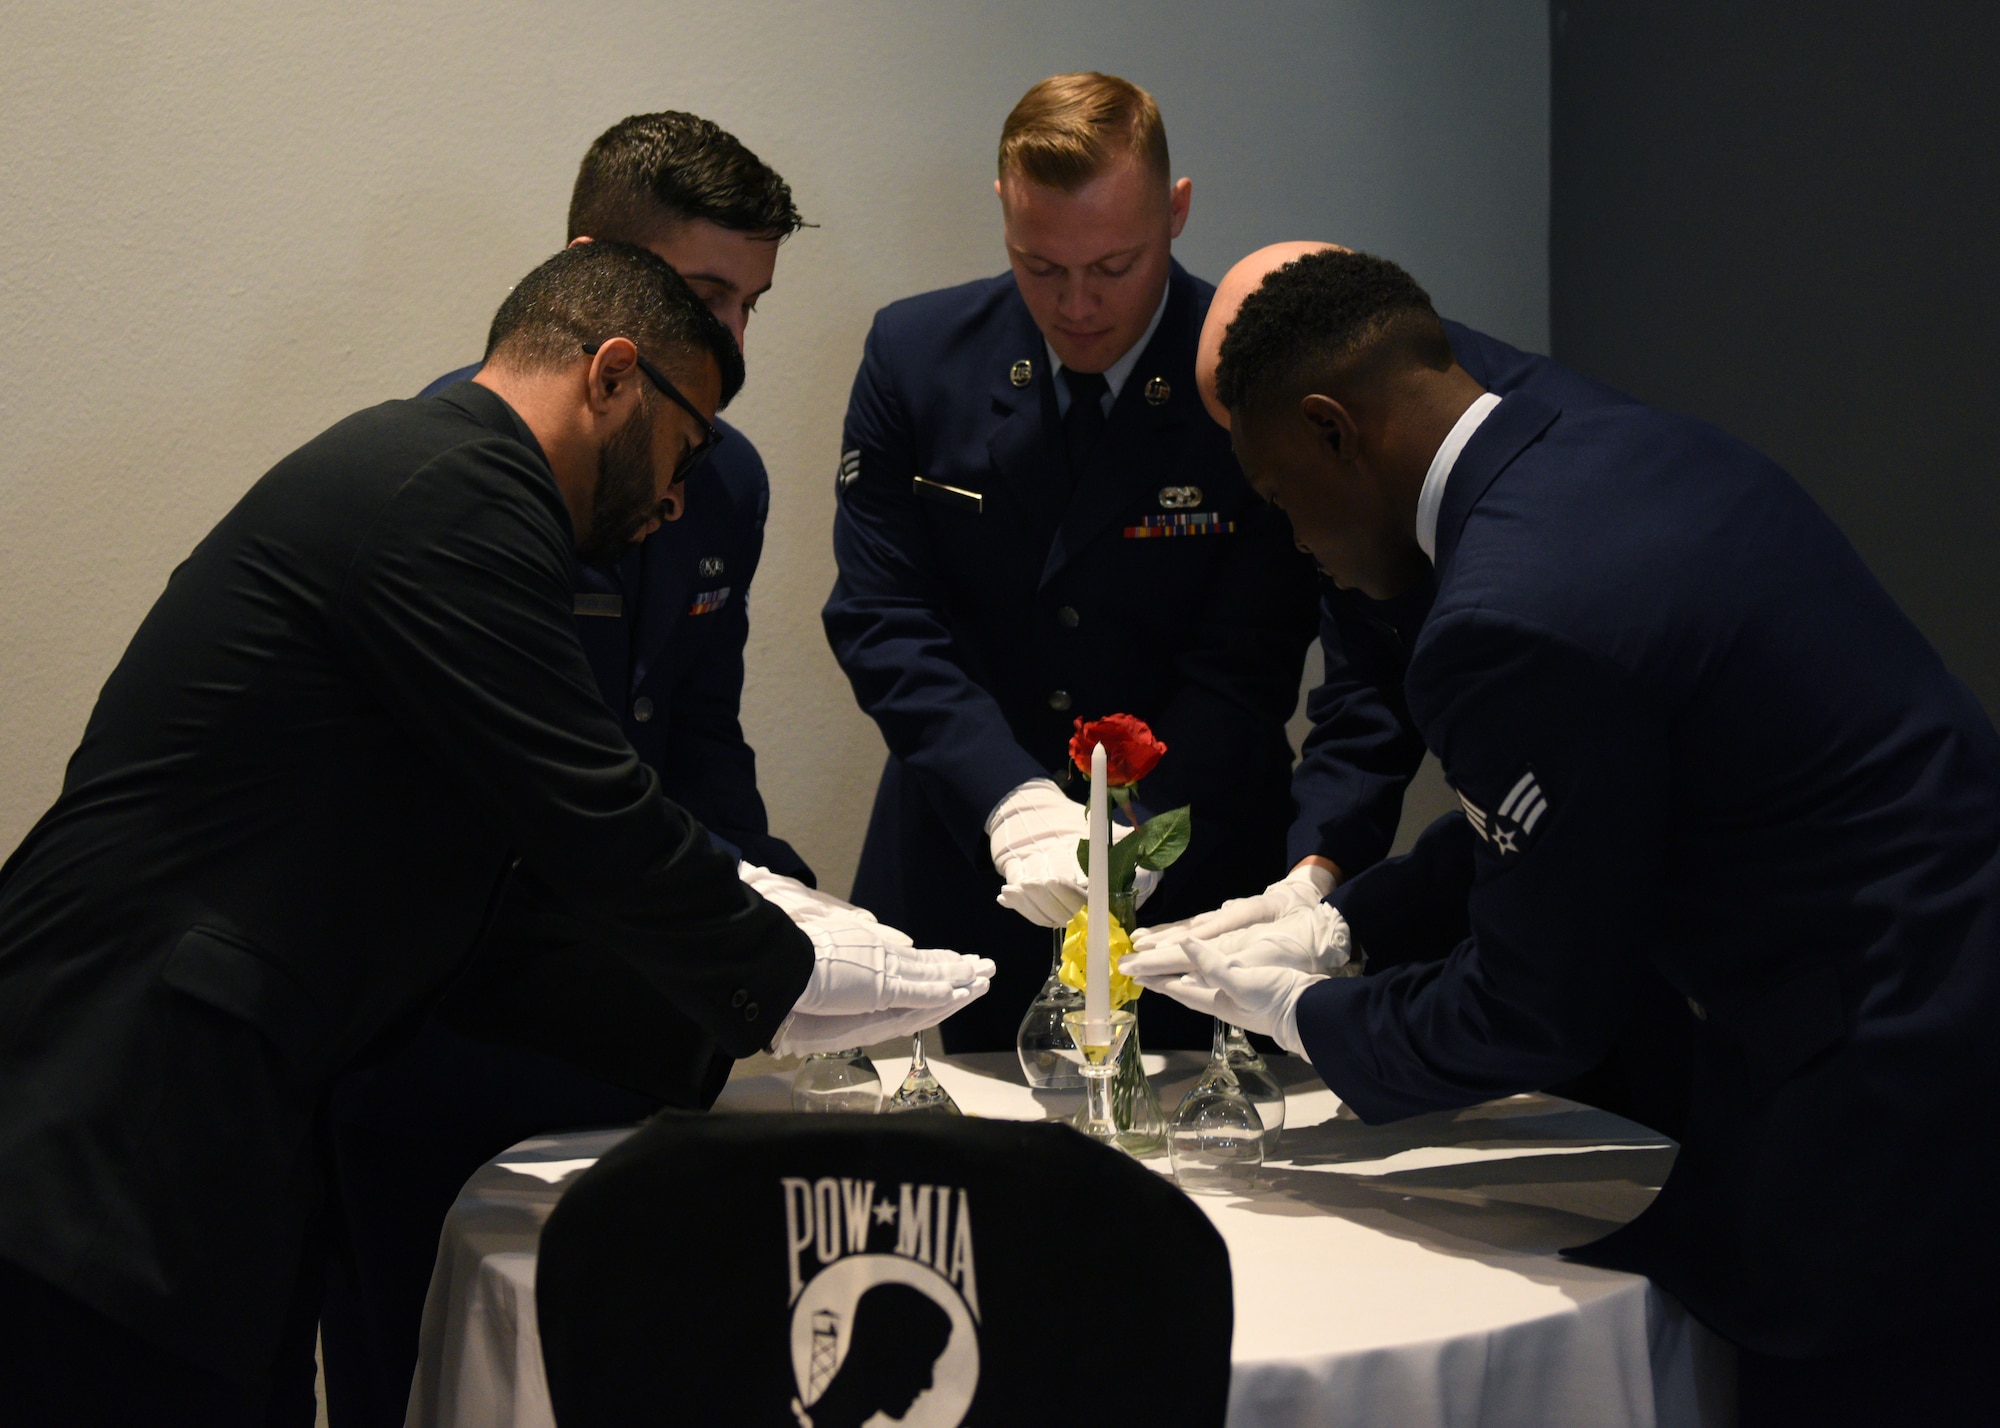 Graduates of Airman Leadership School set the POW/MIA table prior to the ALS Graduation ceremony at the event center on Goodfellow Air Force Base, Texas, August 22, 2019. The table was set as a symbol of honor and remembrance of America’s prisoners of war and missing comrades across all branches. (U.S. Air Force photo by Airman 1st Class Robyn Hunsinger/Released)